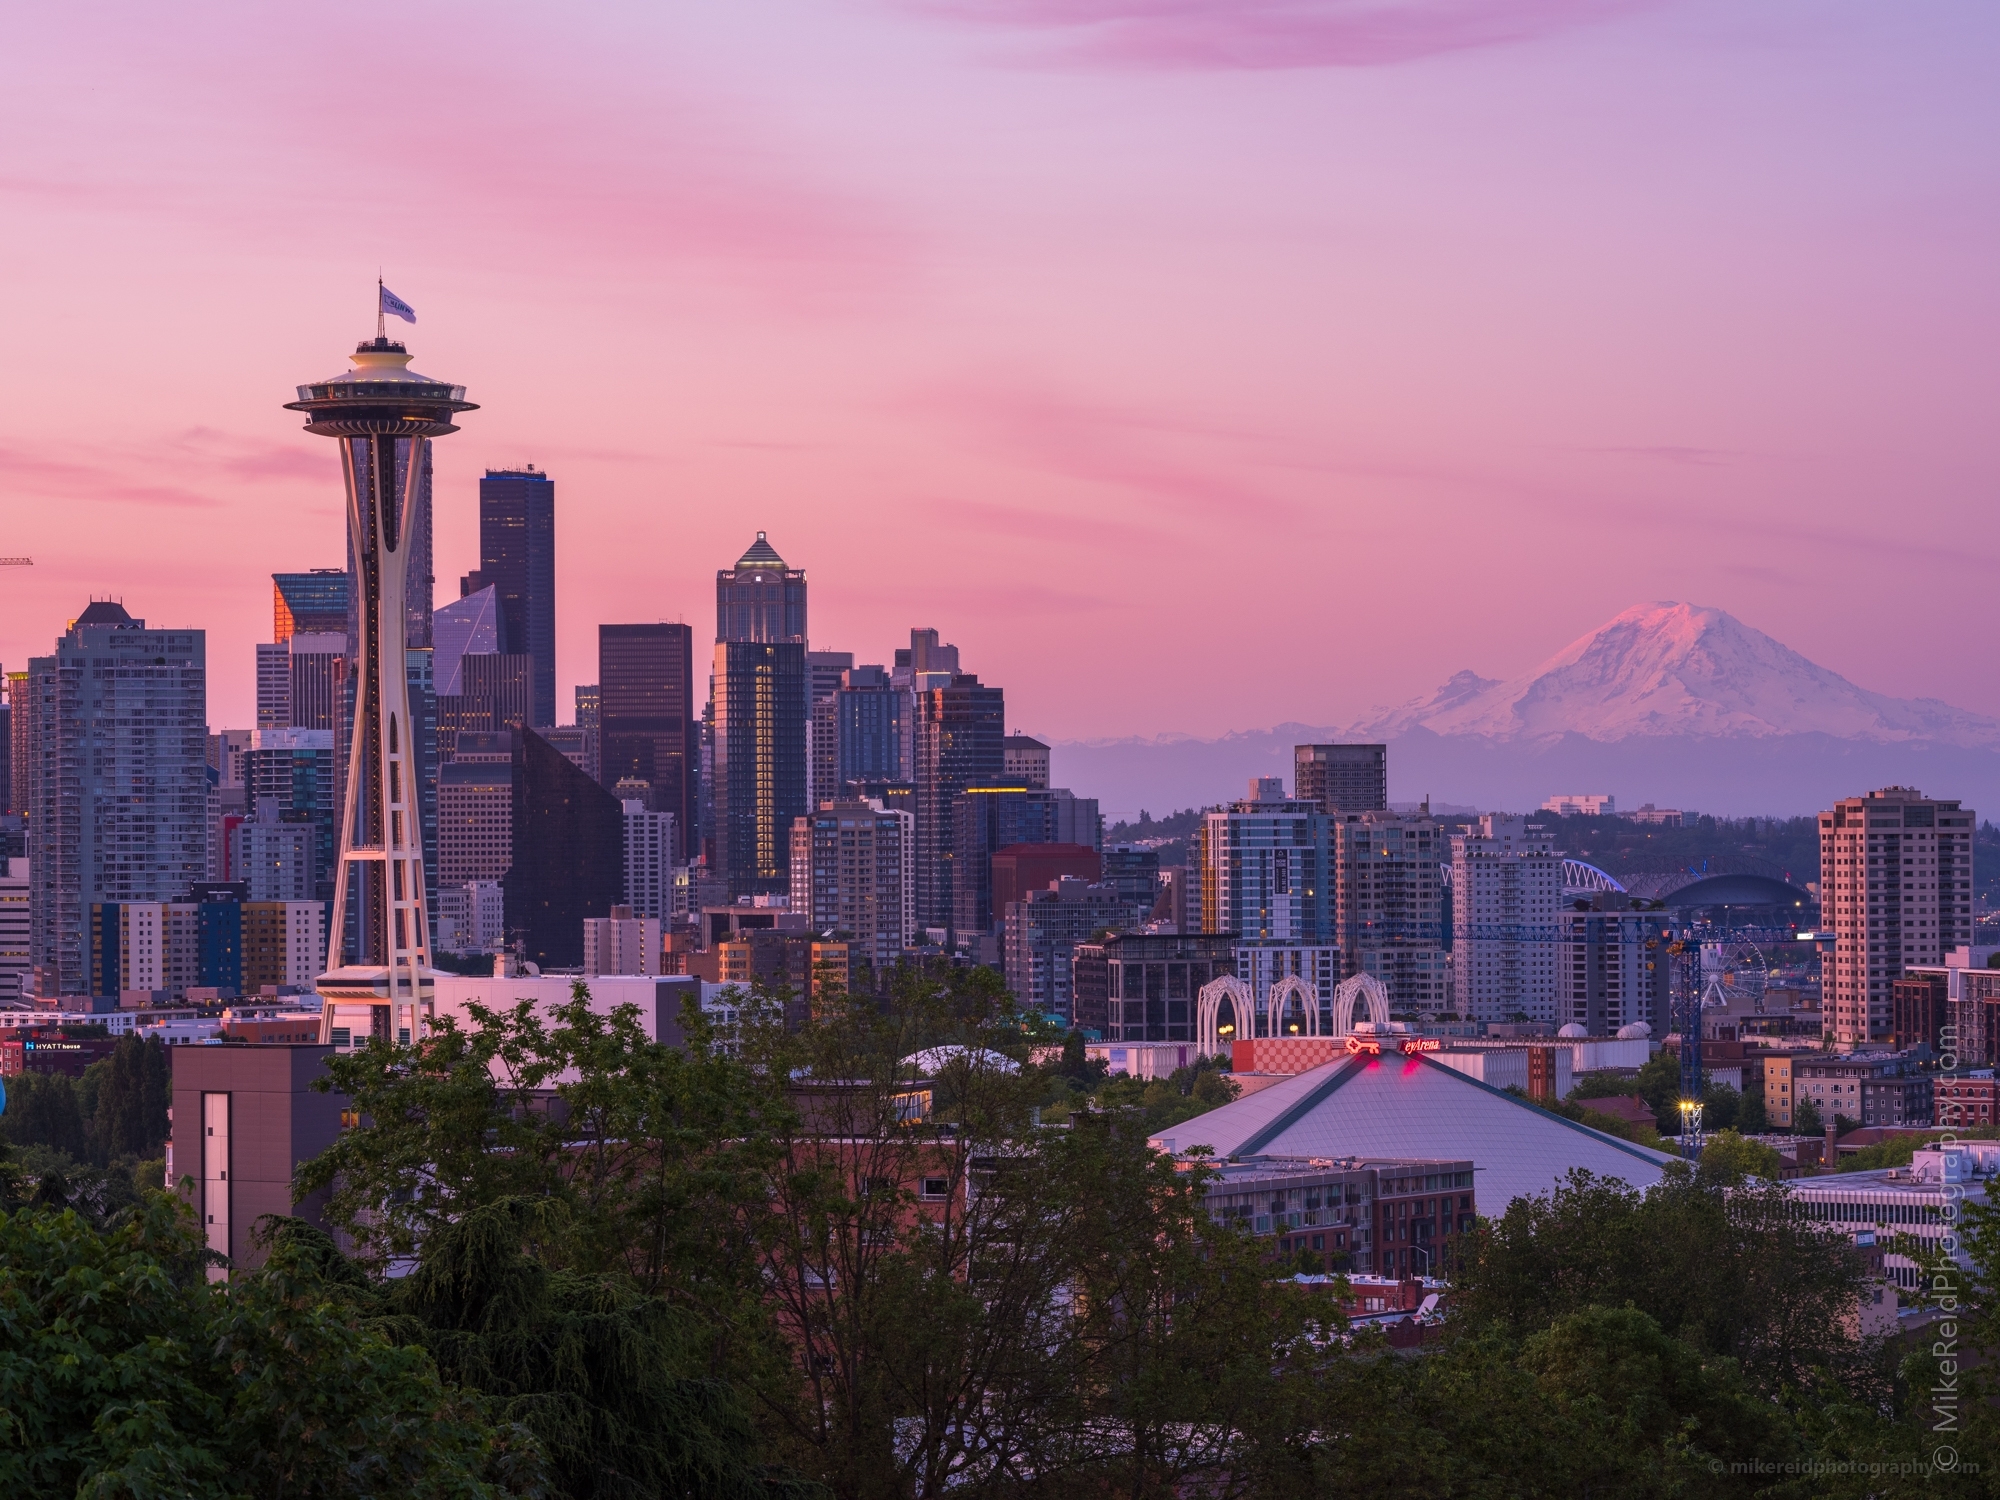 Seattle Kerry Park Dawn Pink.jpg Photography from Seattles Kerry Park is iconic. Everyone wants to go there when they visit to take That Shot. I love being there at sunrise or sunset to see how the light is highlighting the city and Mount Rainier. Contact me for custom Seattle photography tours.